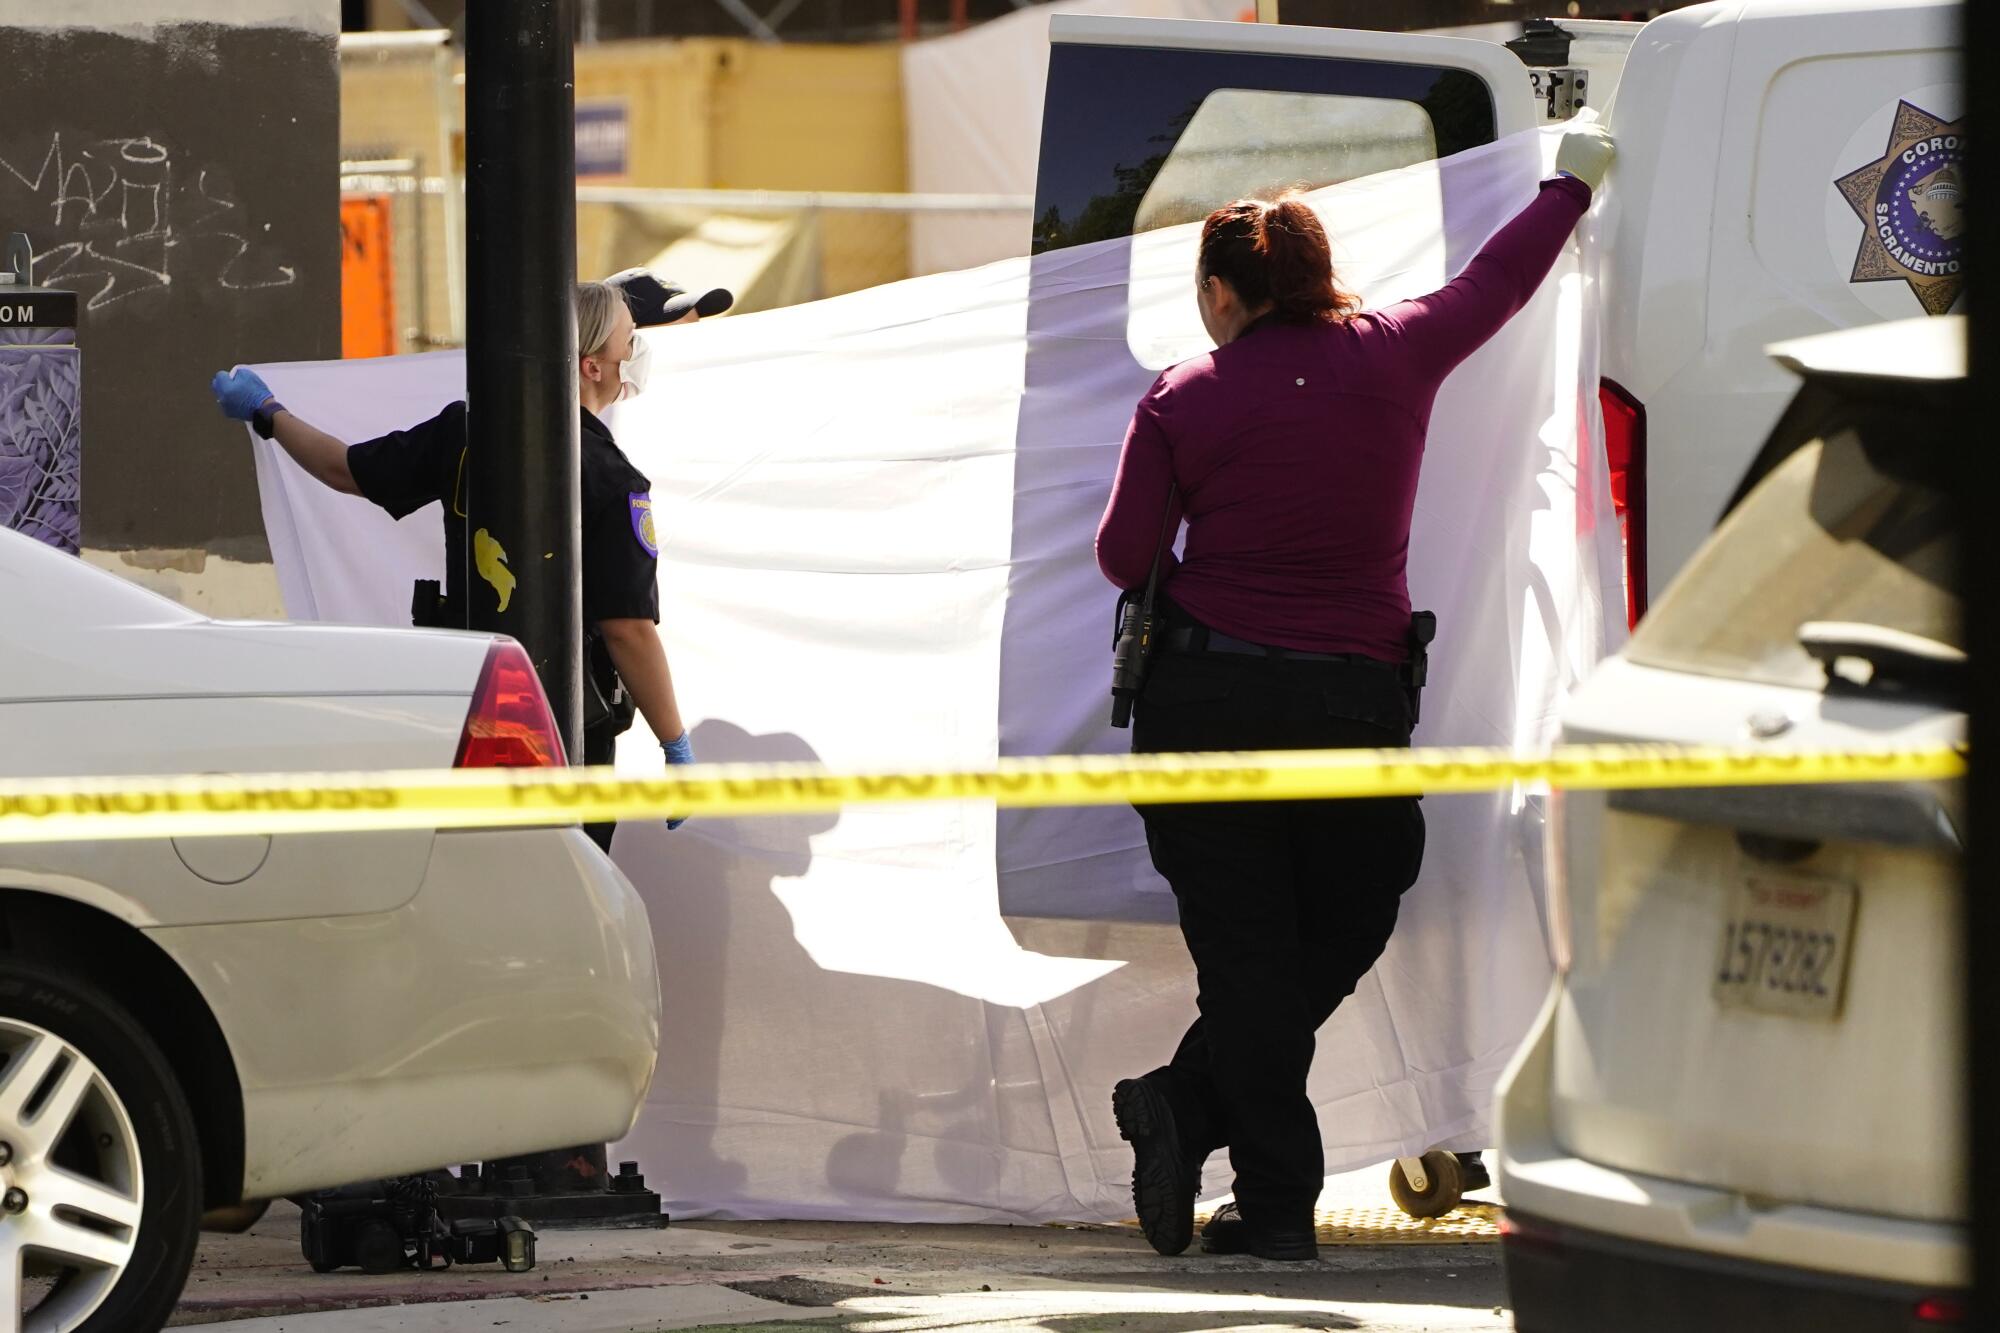 A sheet is held up to block from view the transfer the body of a victim into a coroner's van